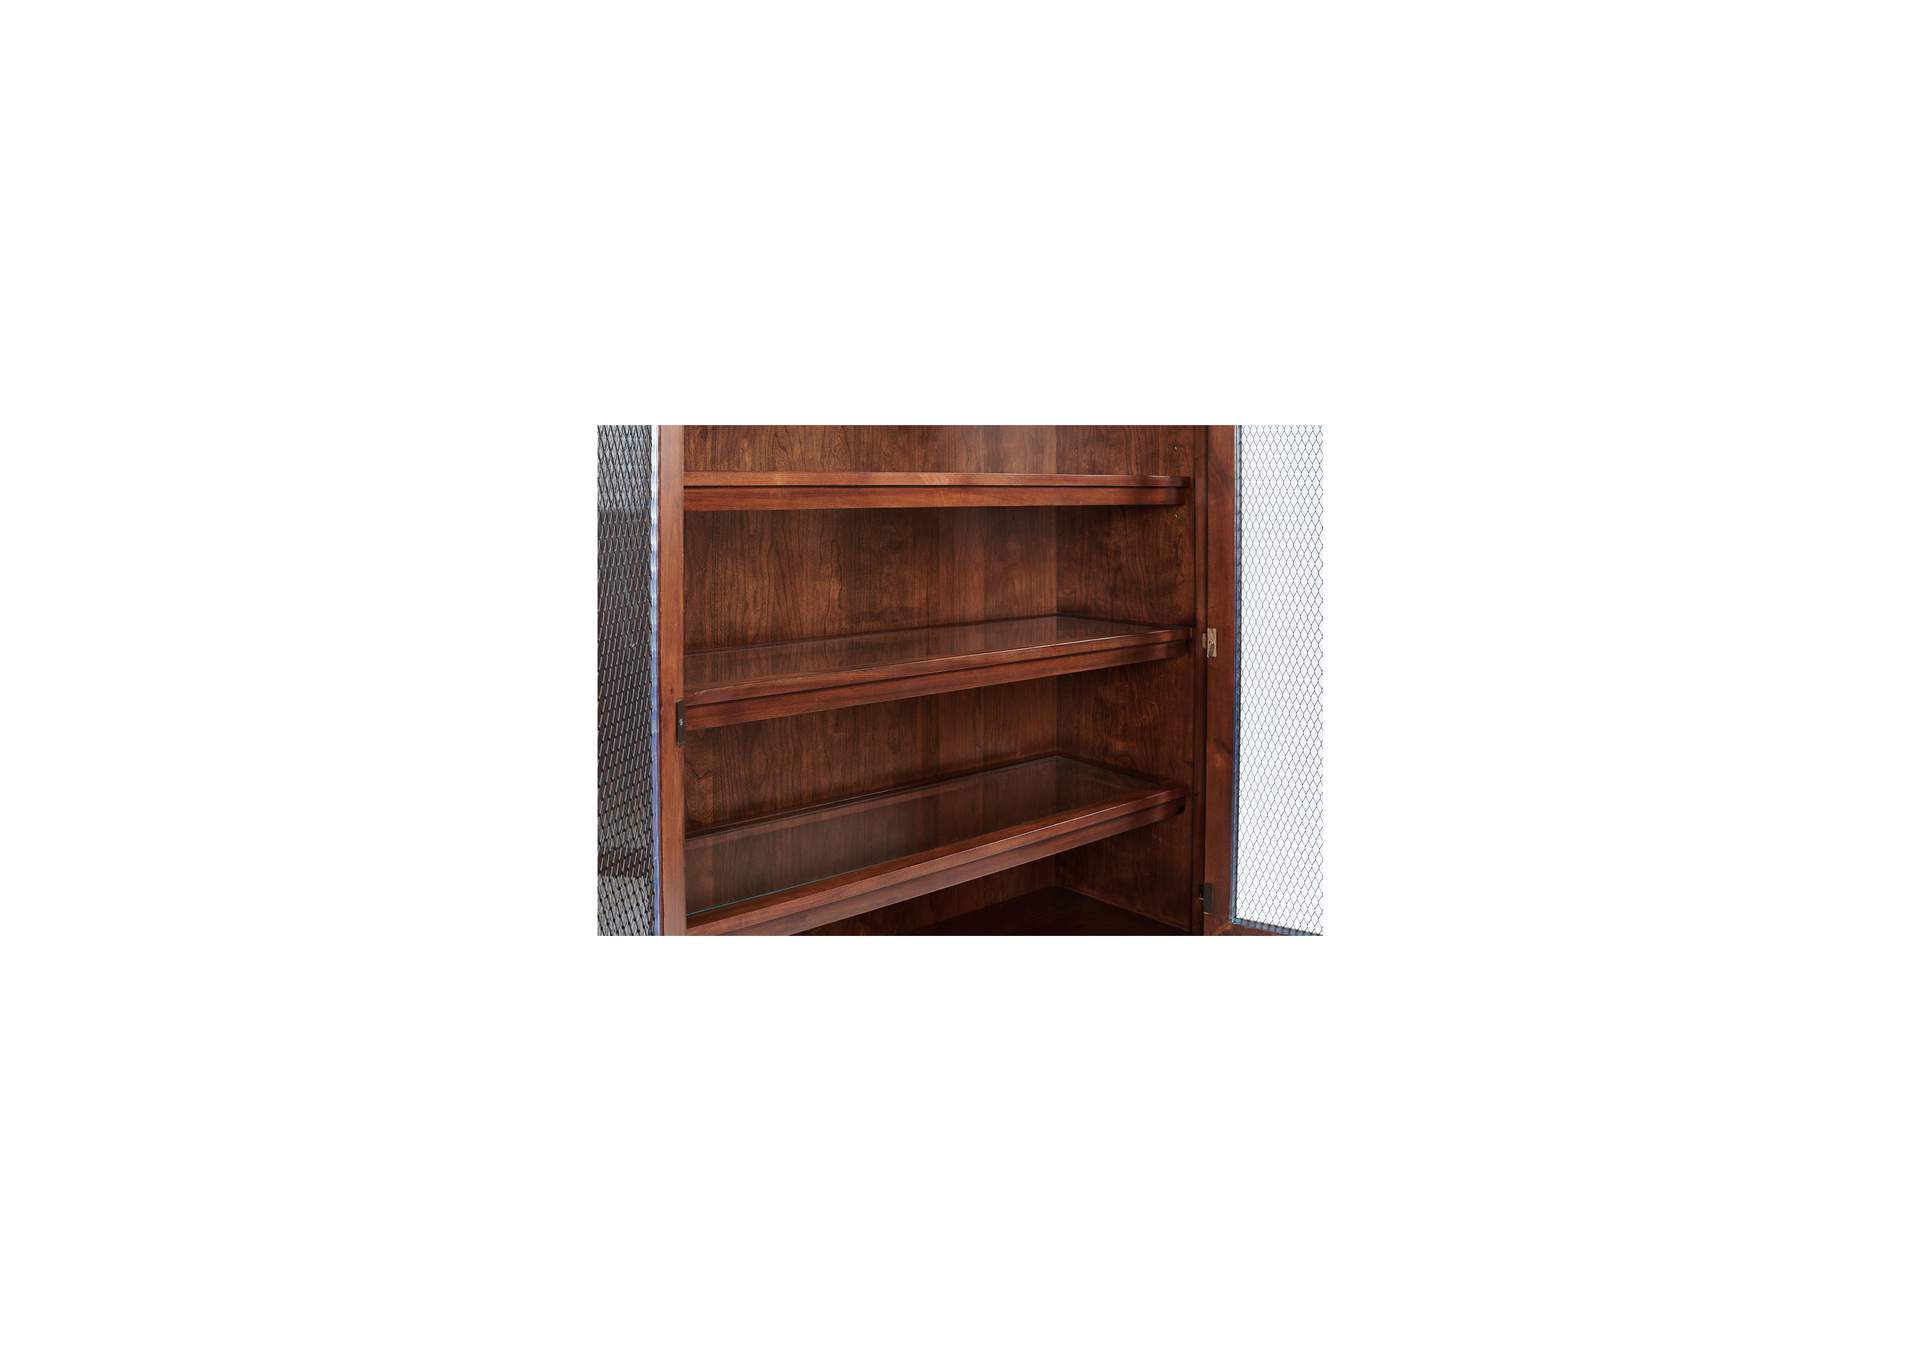 Clinton Hill Classic Cherry Display Cabinet,Riverside